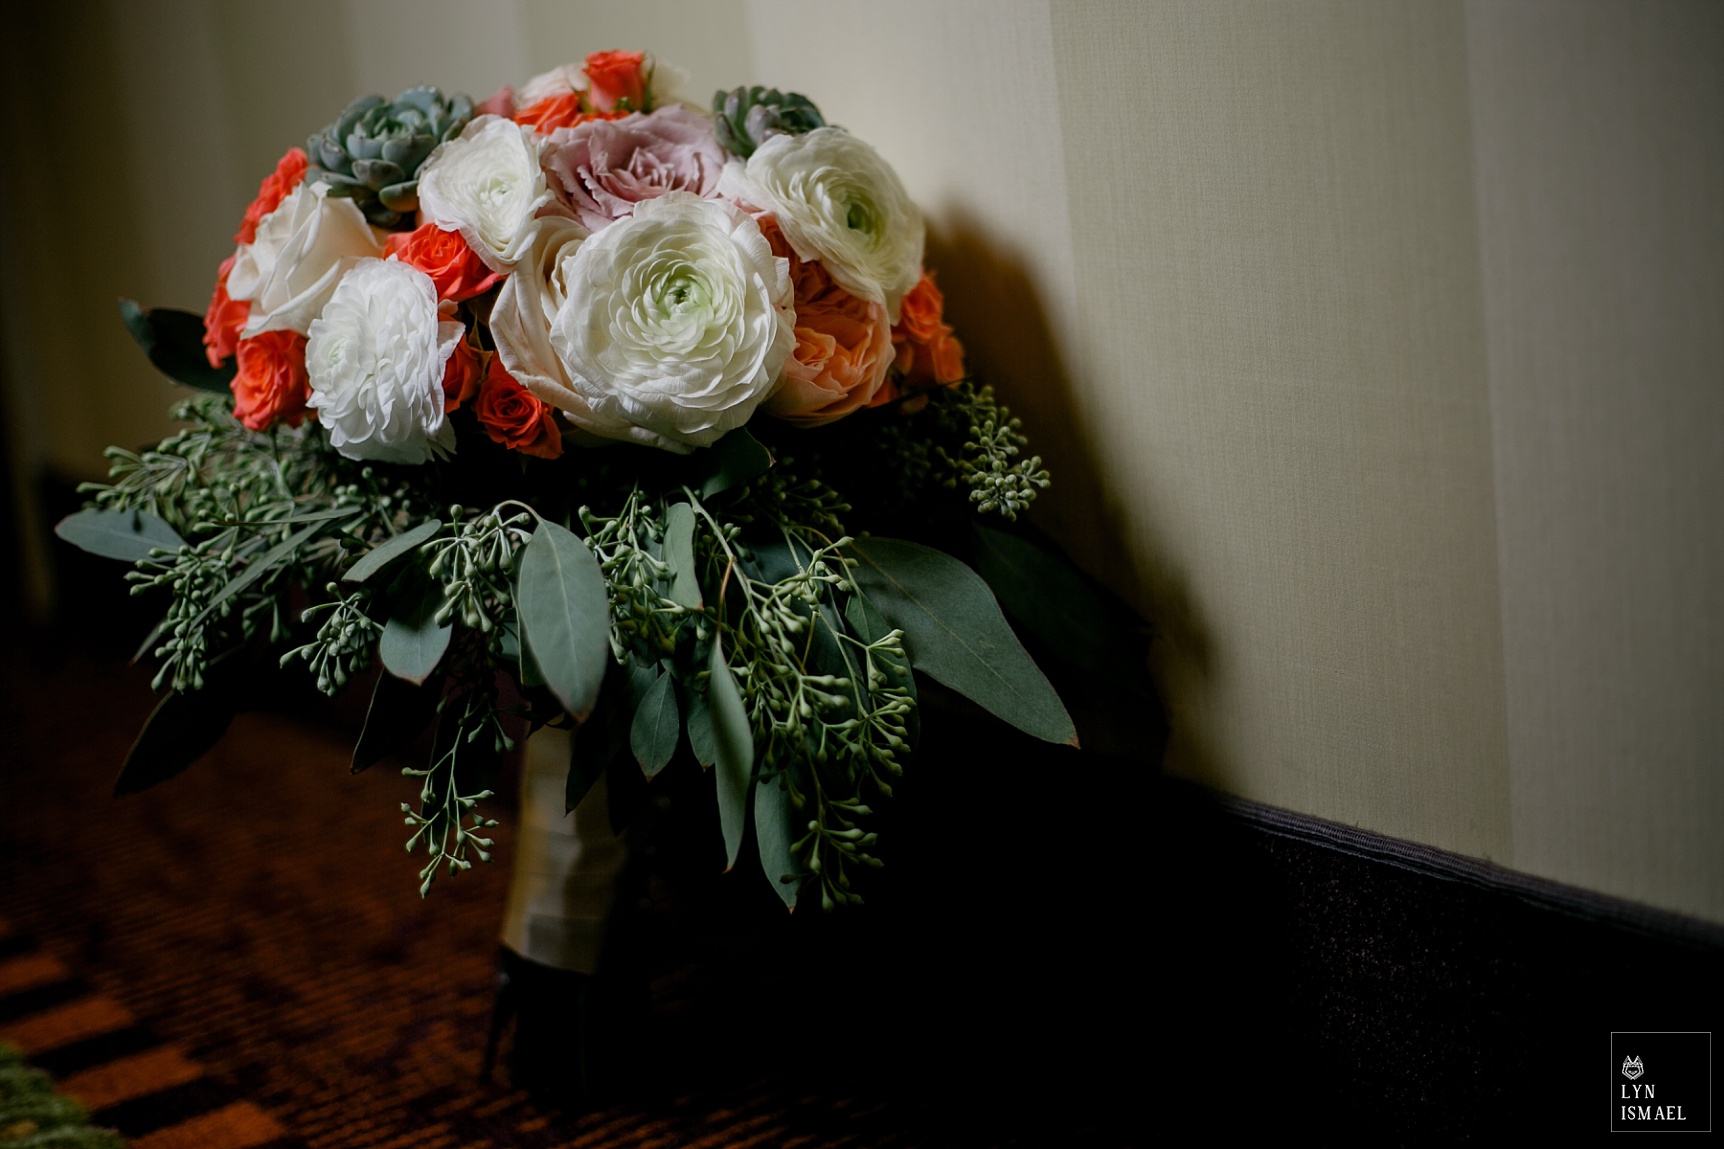 White ranunculus with coral roses as wedding bouquet at a wedding in Cambridge, Ontario